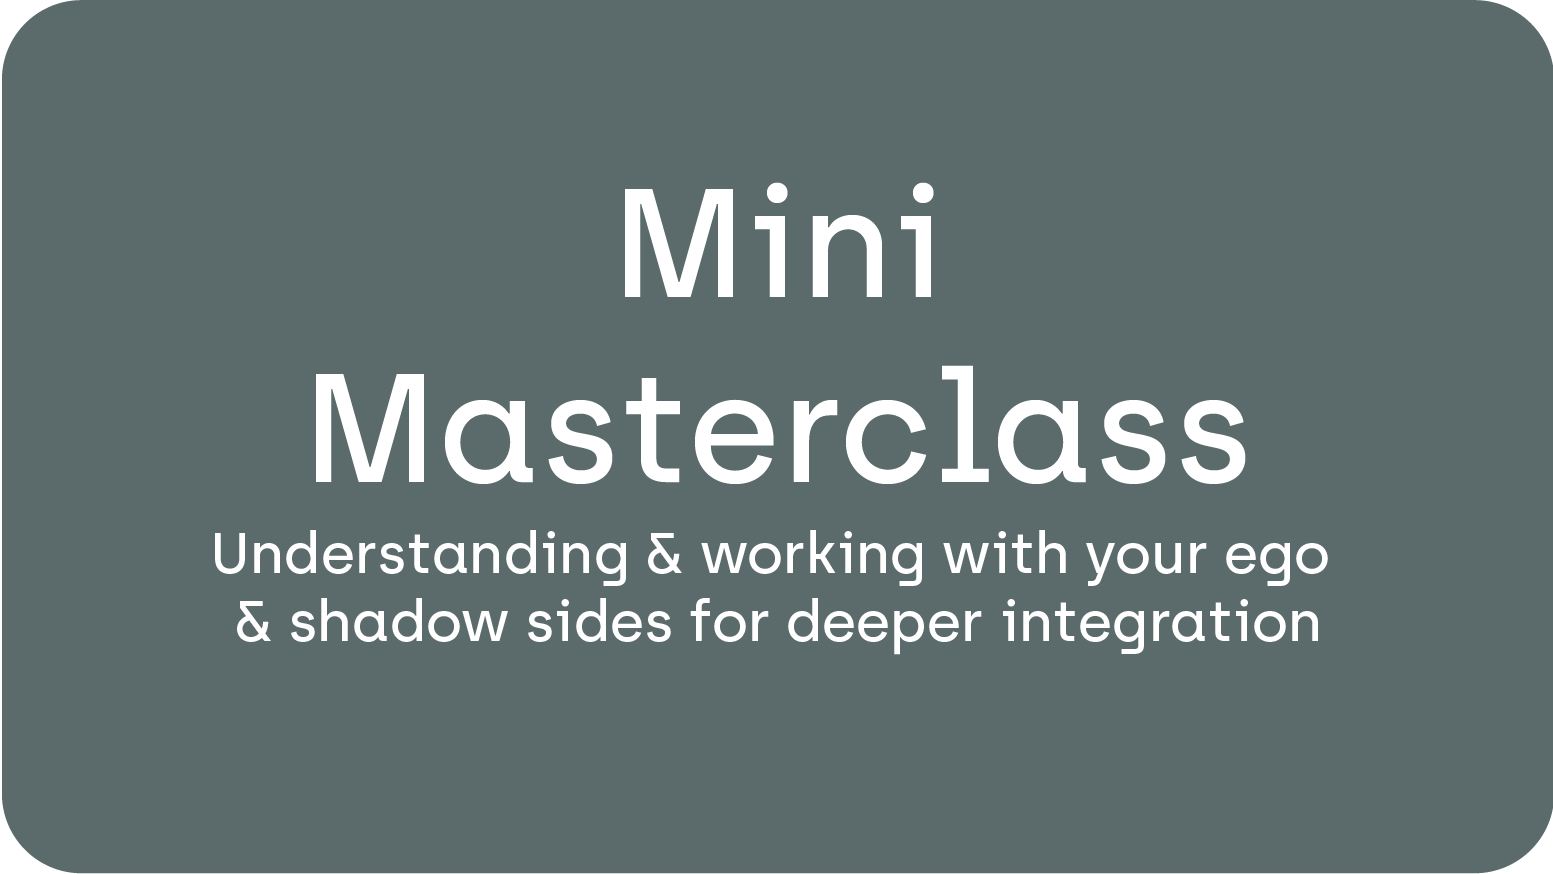 Mini Masterclass; Understanding and working with your ego and shadow sides for deeper integration